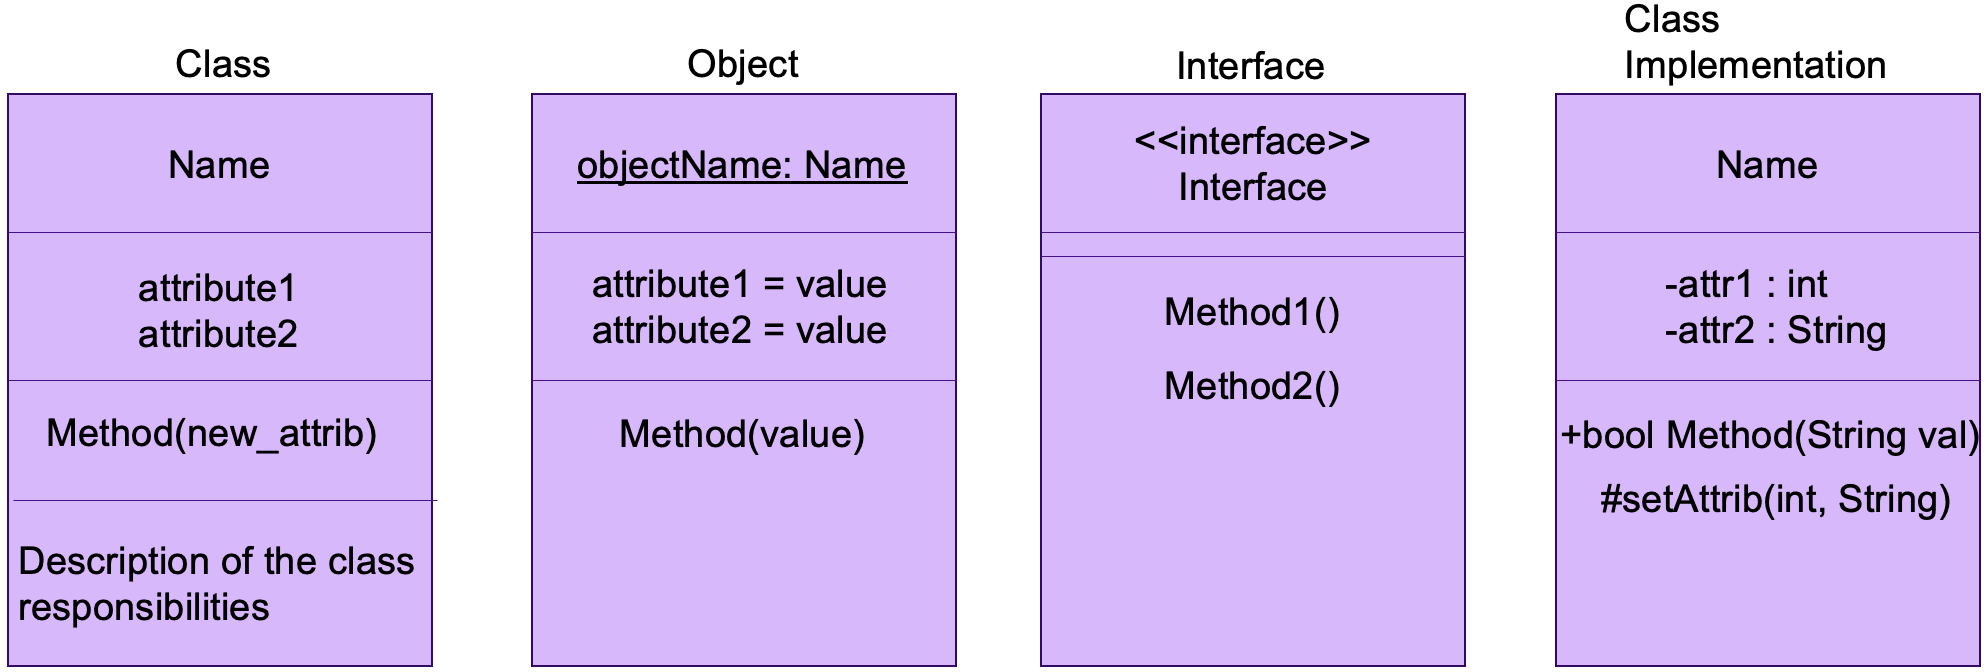 a picture representing UML class, object interface and implementation of a class as boxes